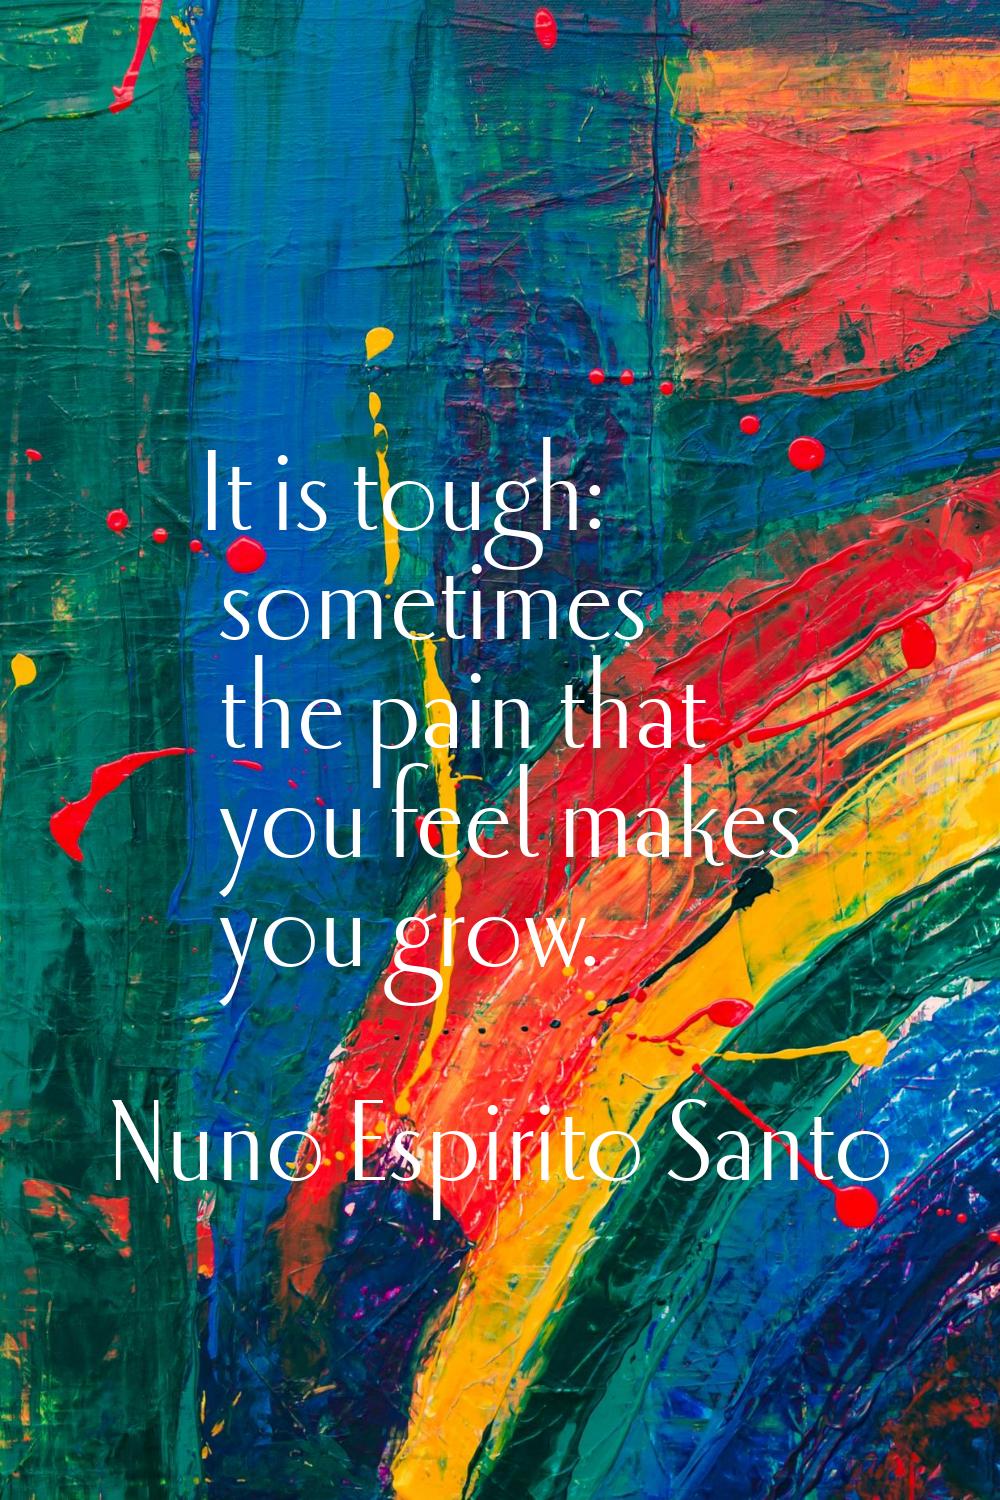 It is tough: sometimes the pain that you feel makes you grow.